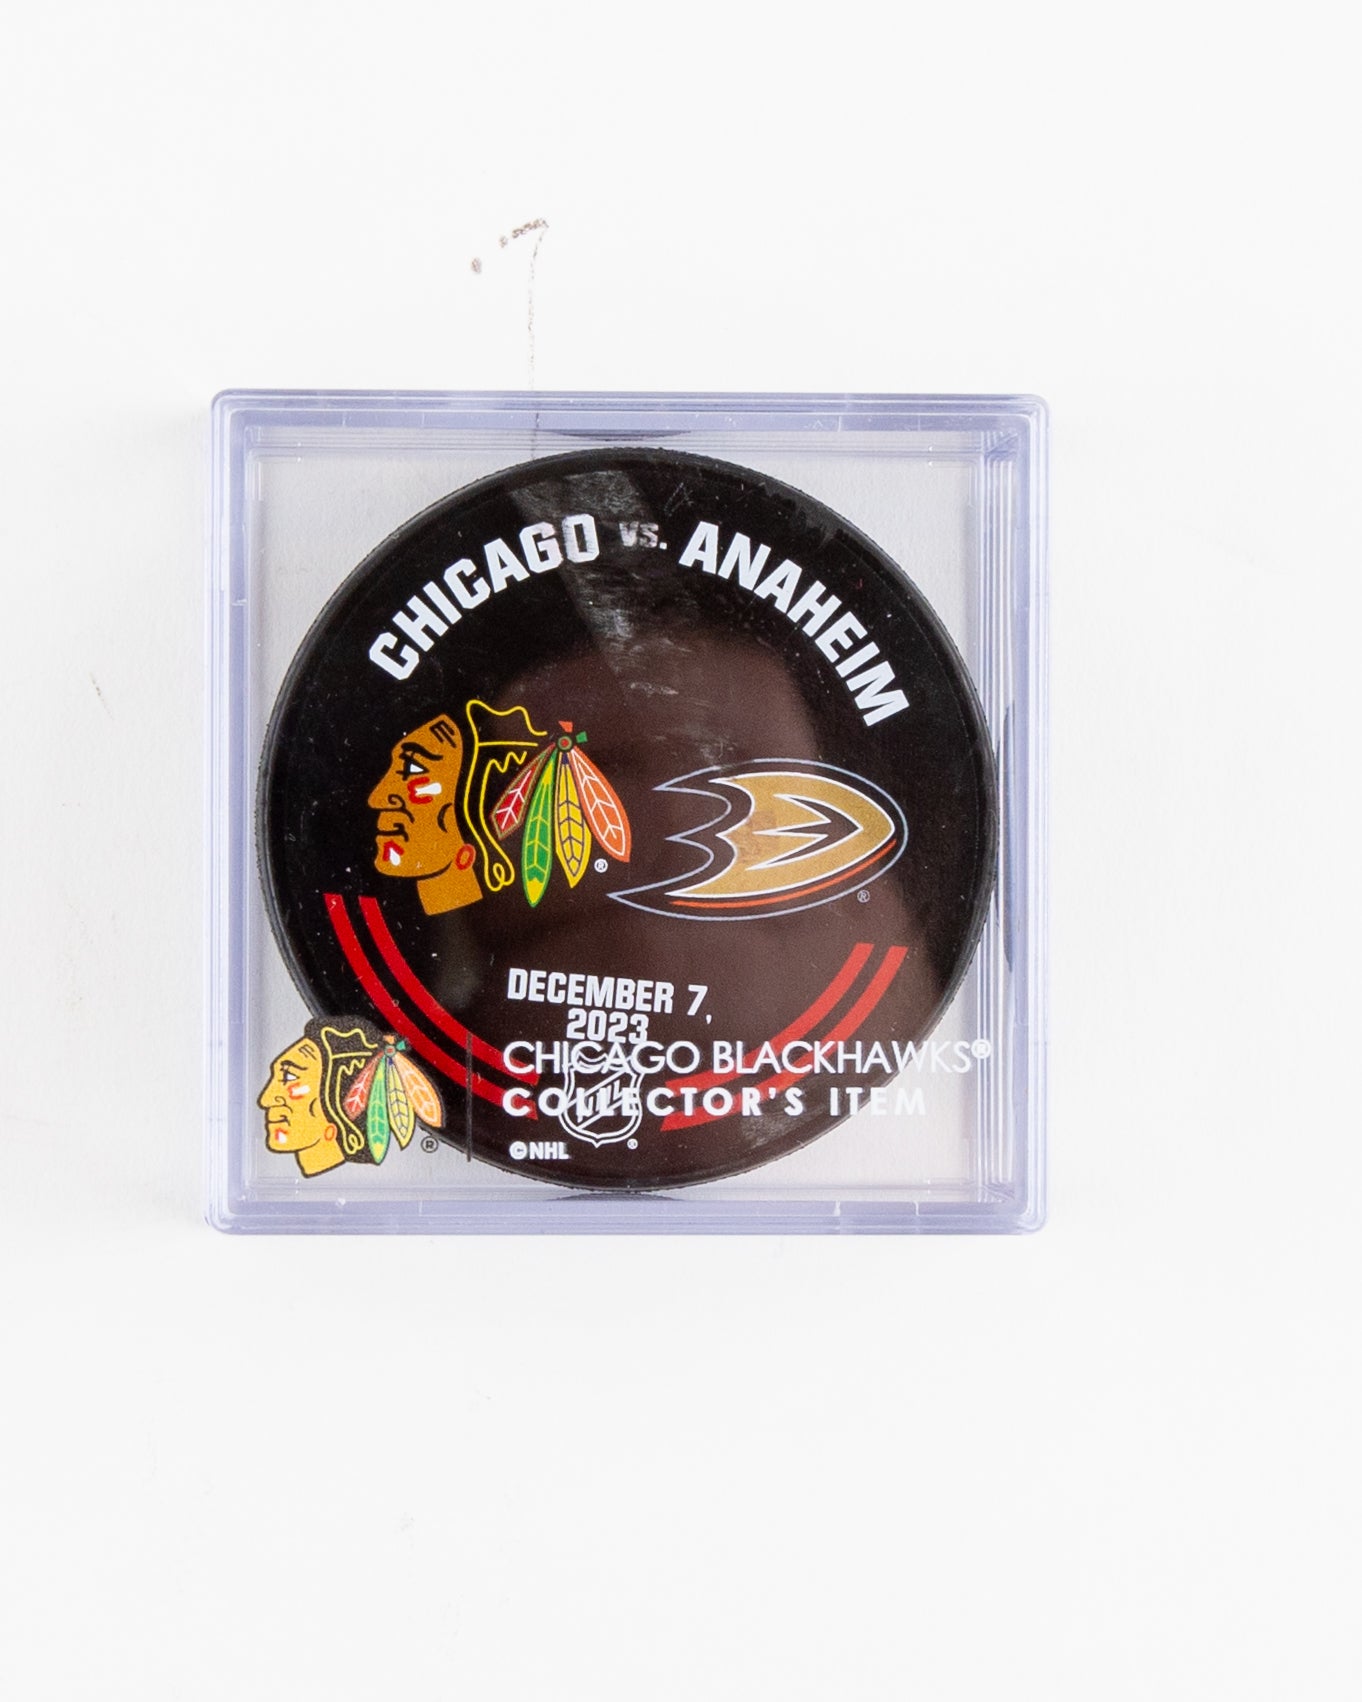 official warm up puck from Chicago Blackhawks vs Anaheim Ducks on December 7, 2023 - front lay flat